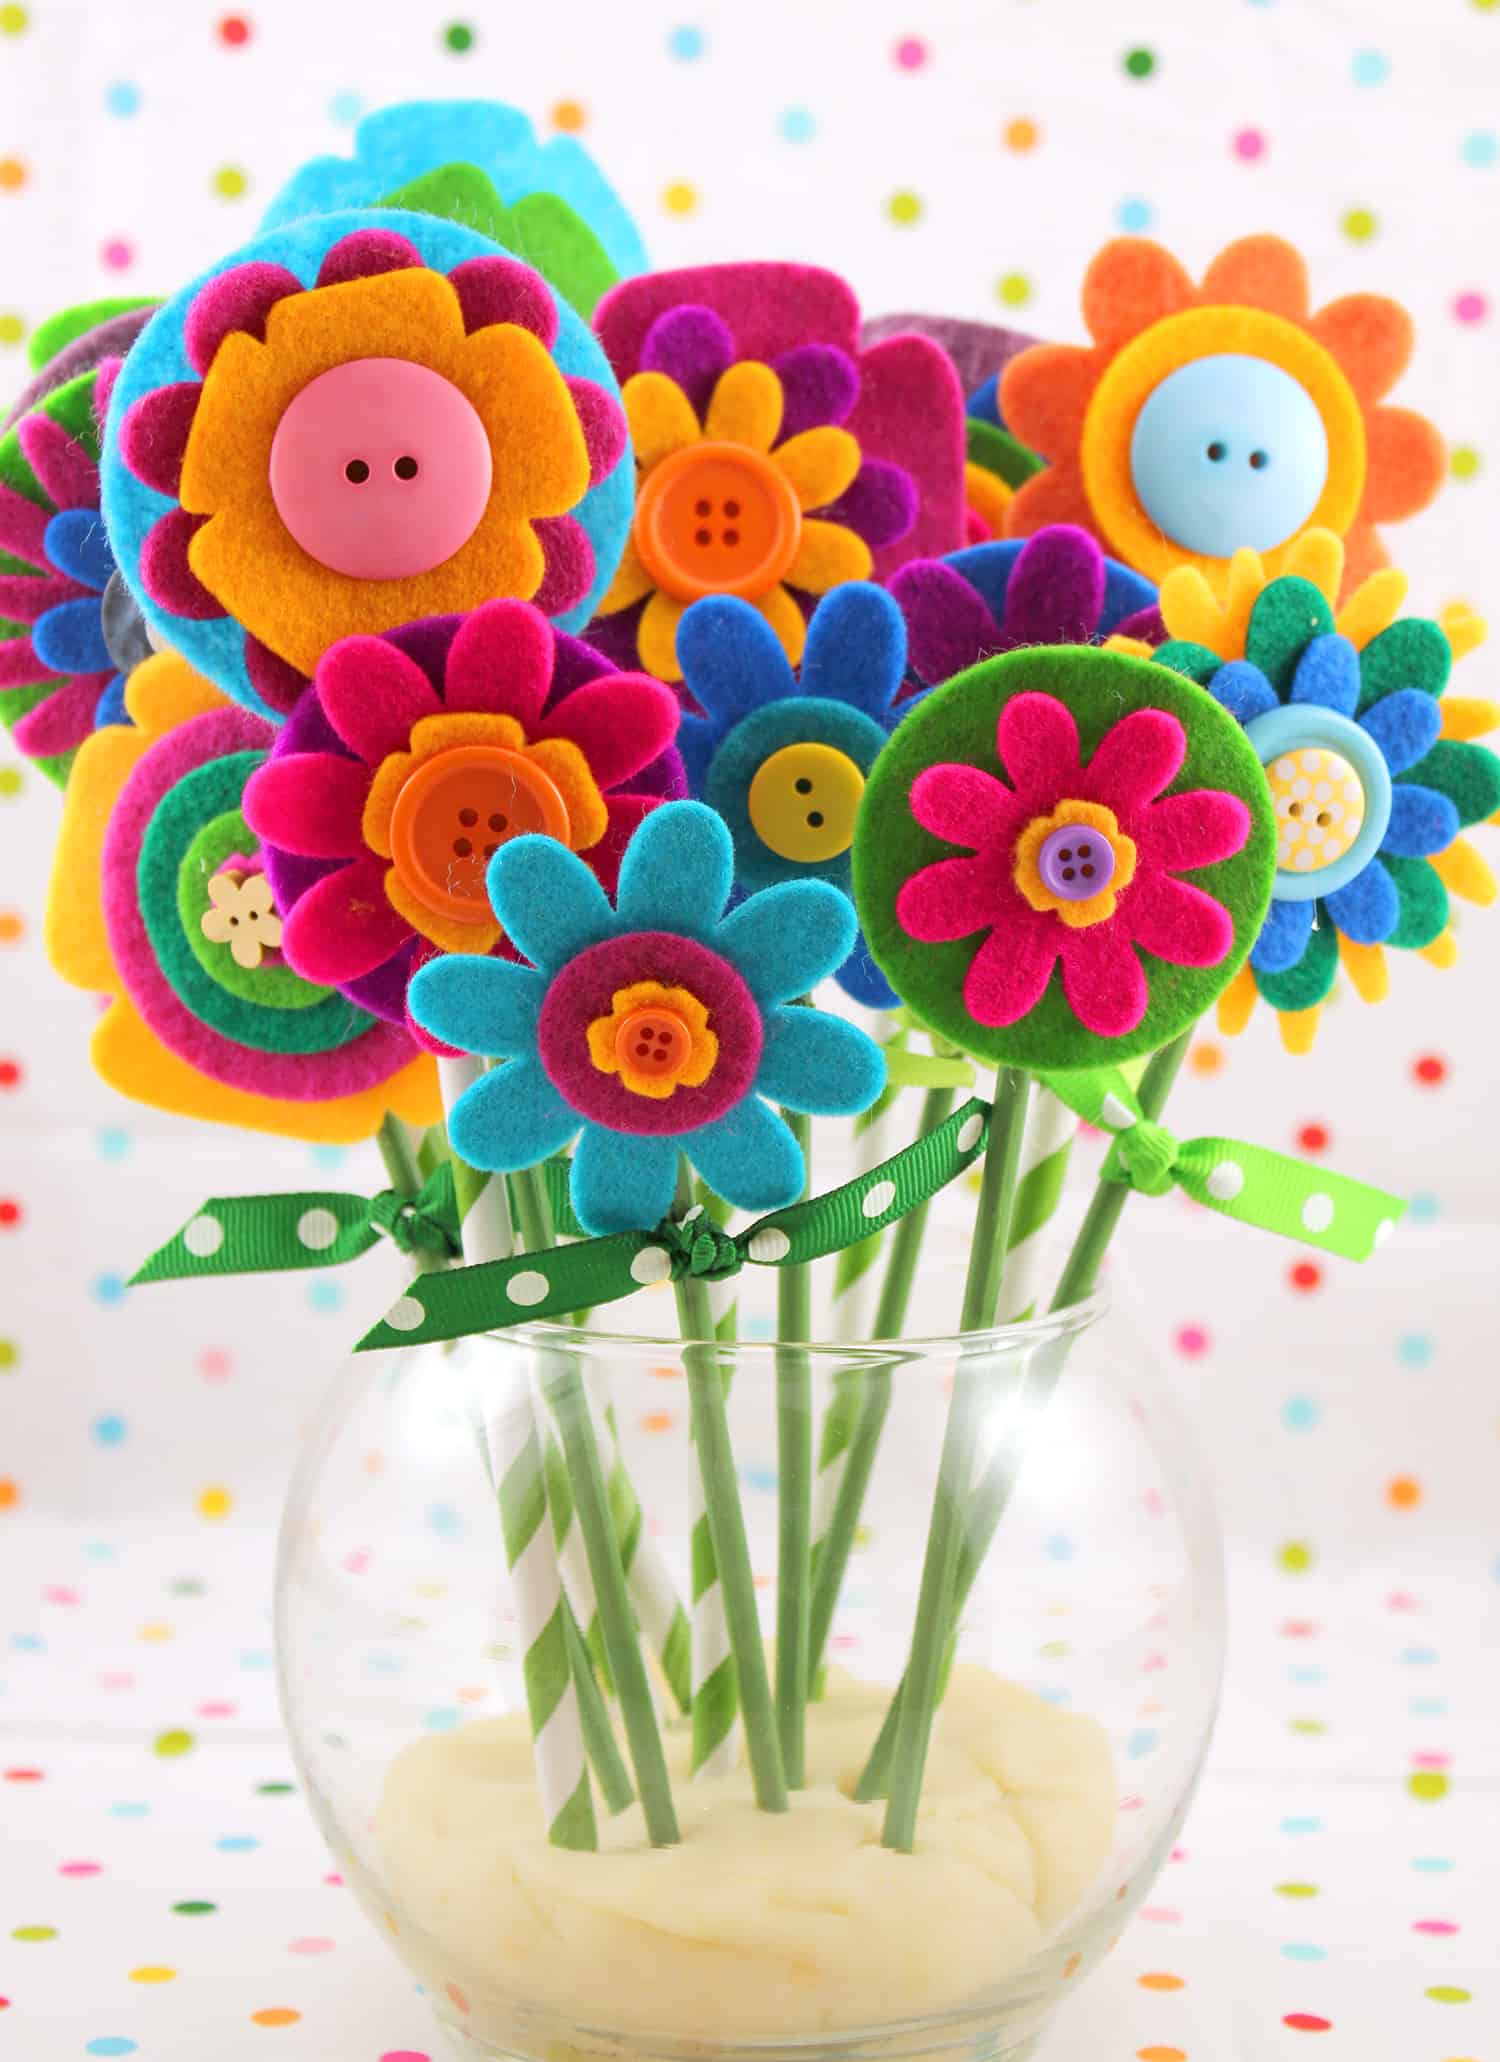 Felt, button, and straw flowers